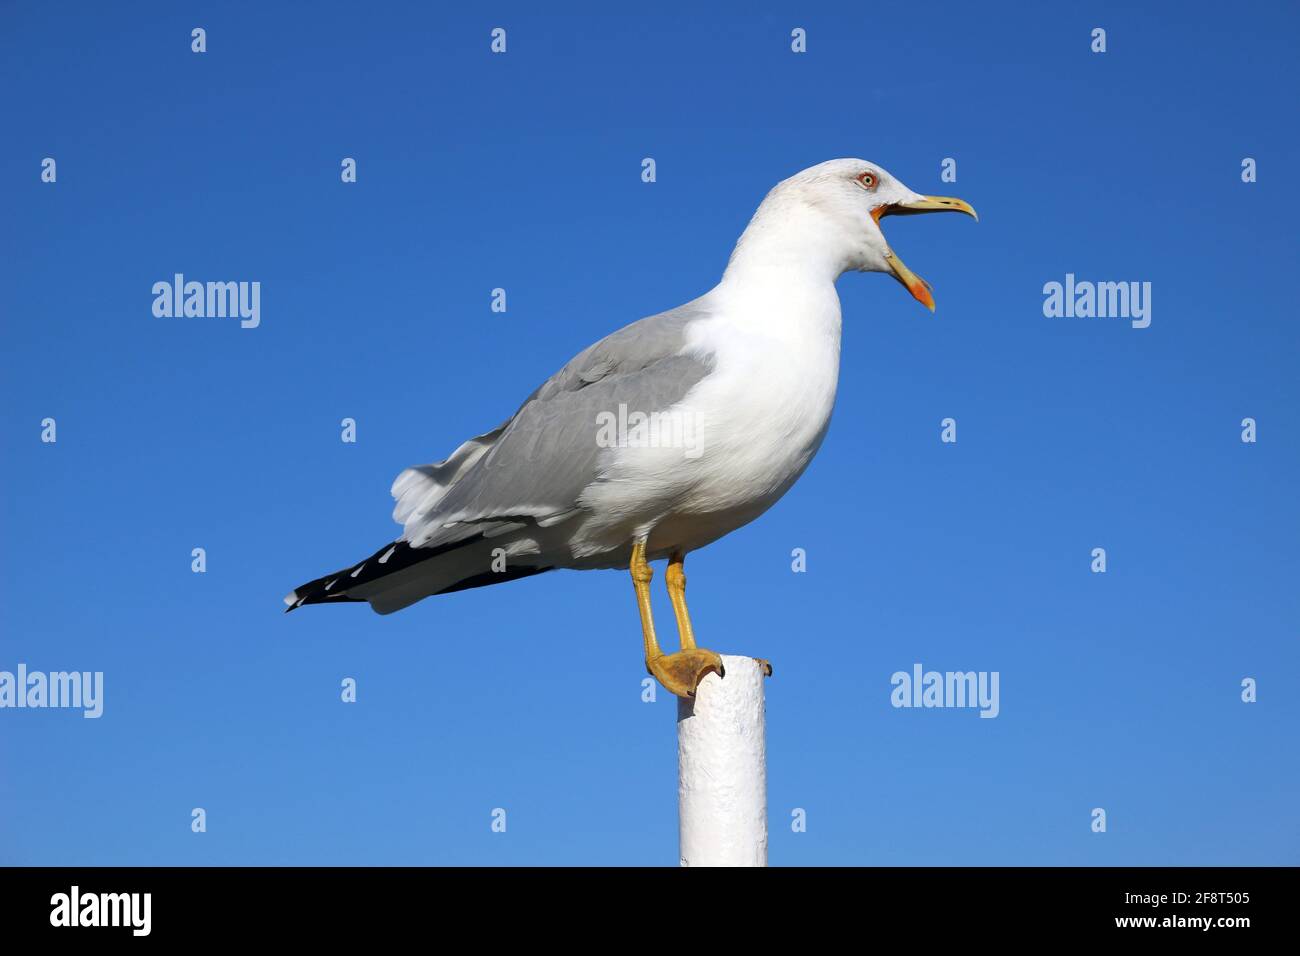 Large seagull with an open beak against blue sky, beautiful seabird stands on pole and shouts Stock Photo